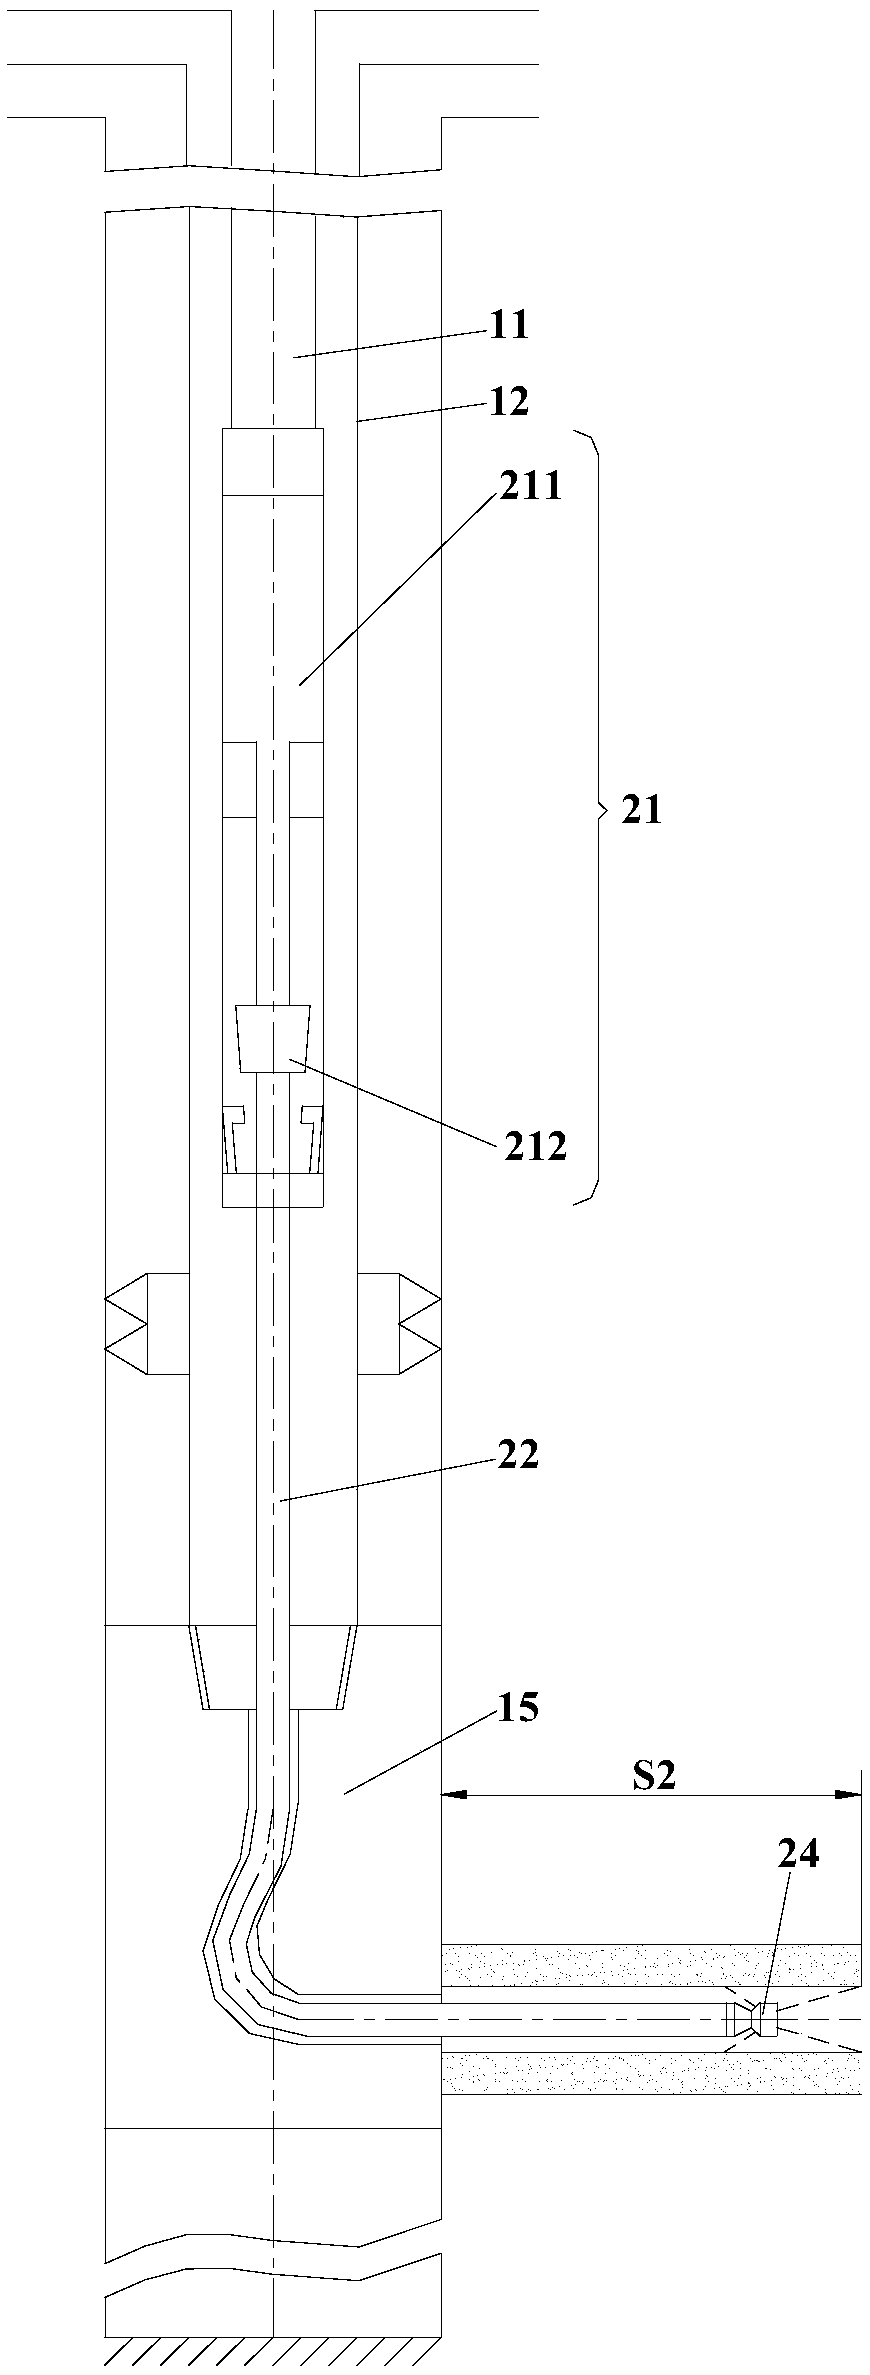 Method for evaluating stratum working parameters applicable to a radial well through jet drillability